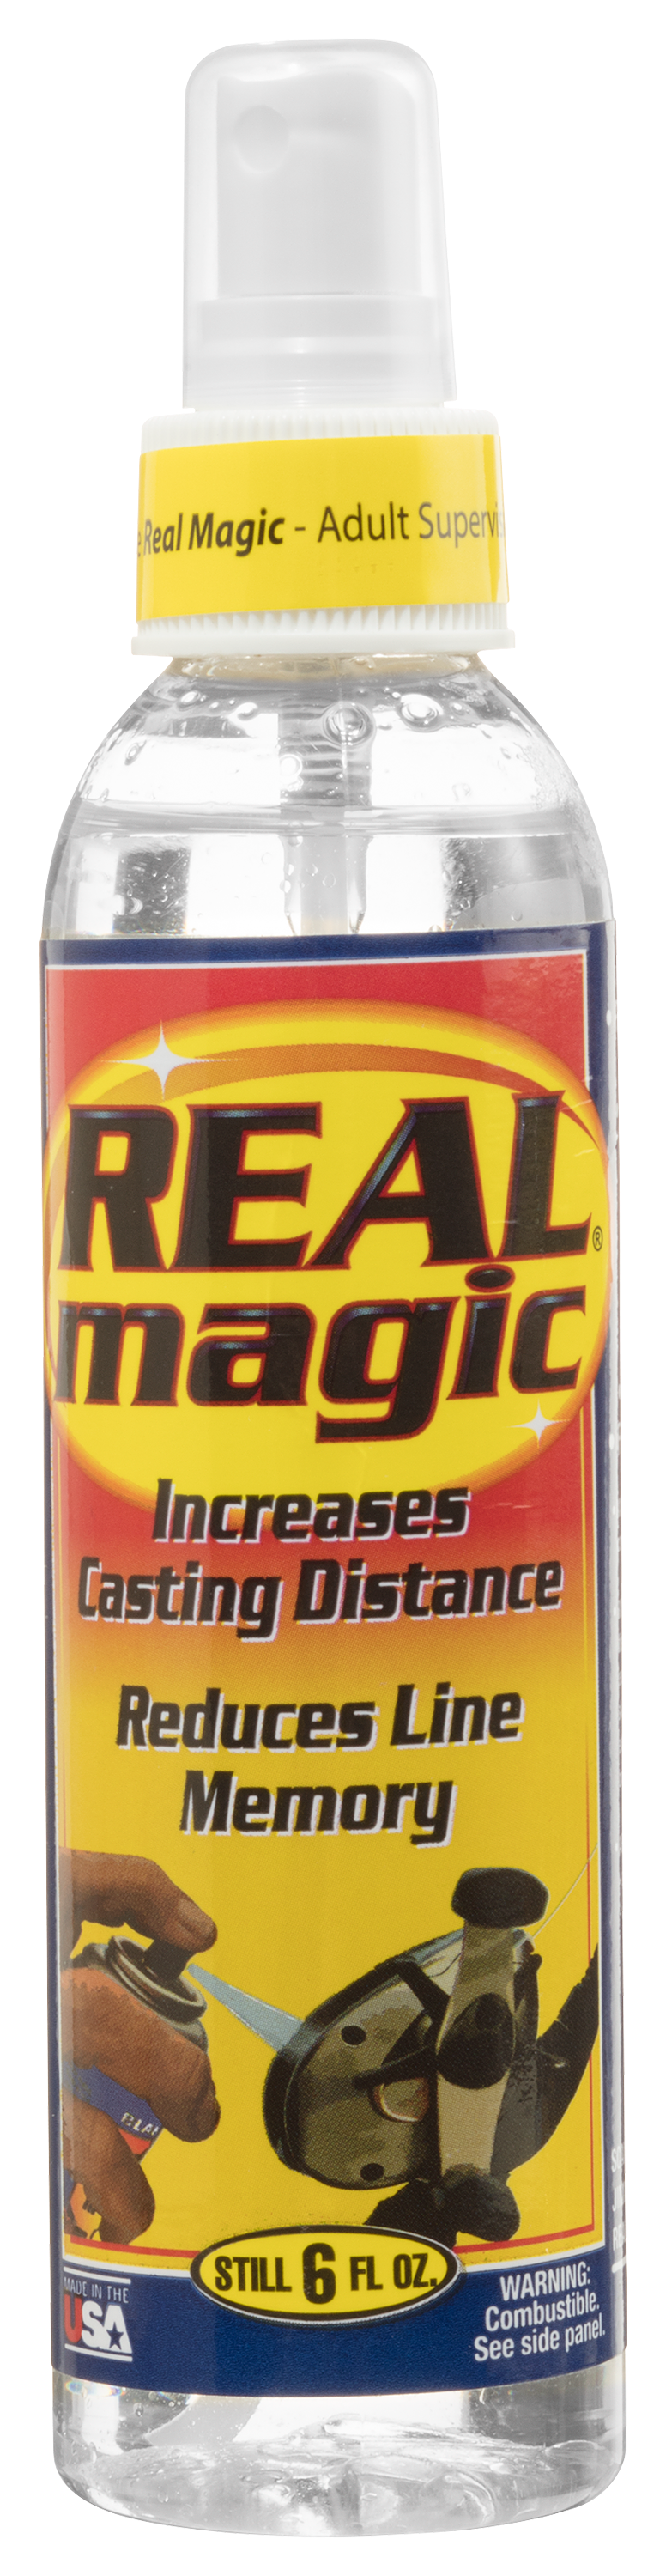 Blakemore Real Magic Lubricant